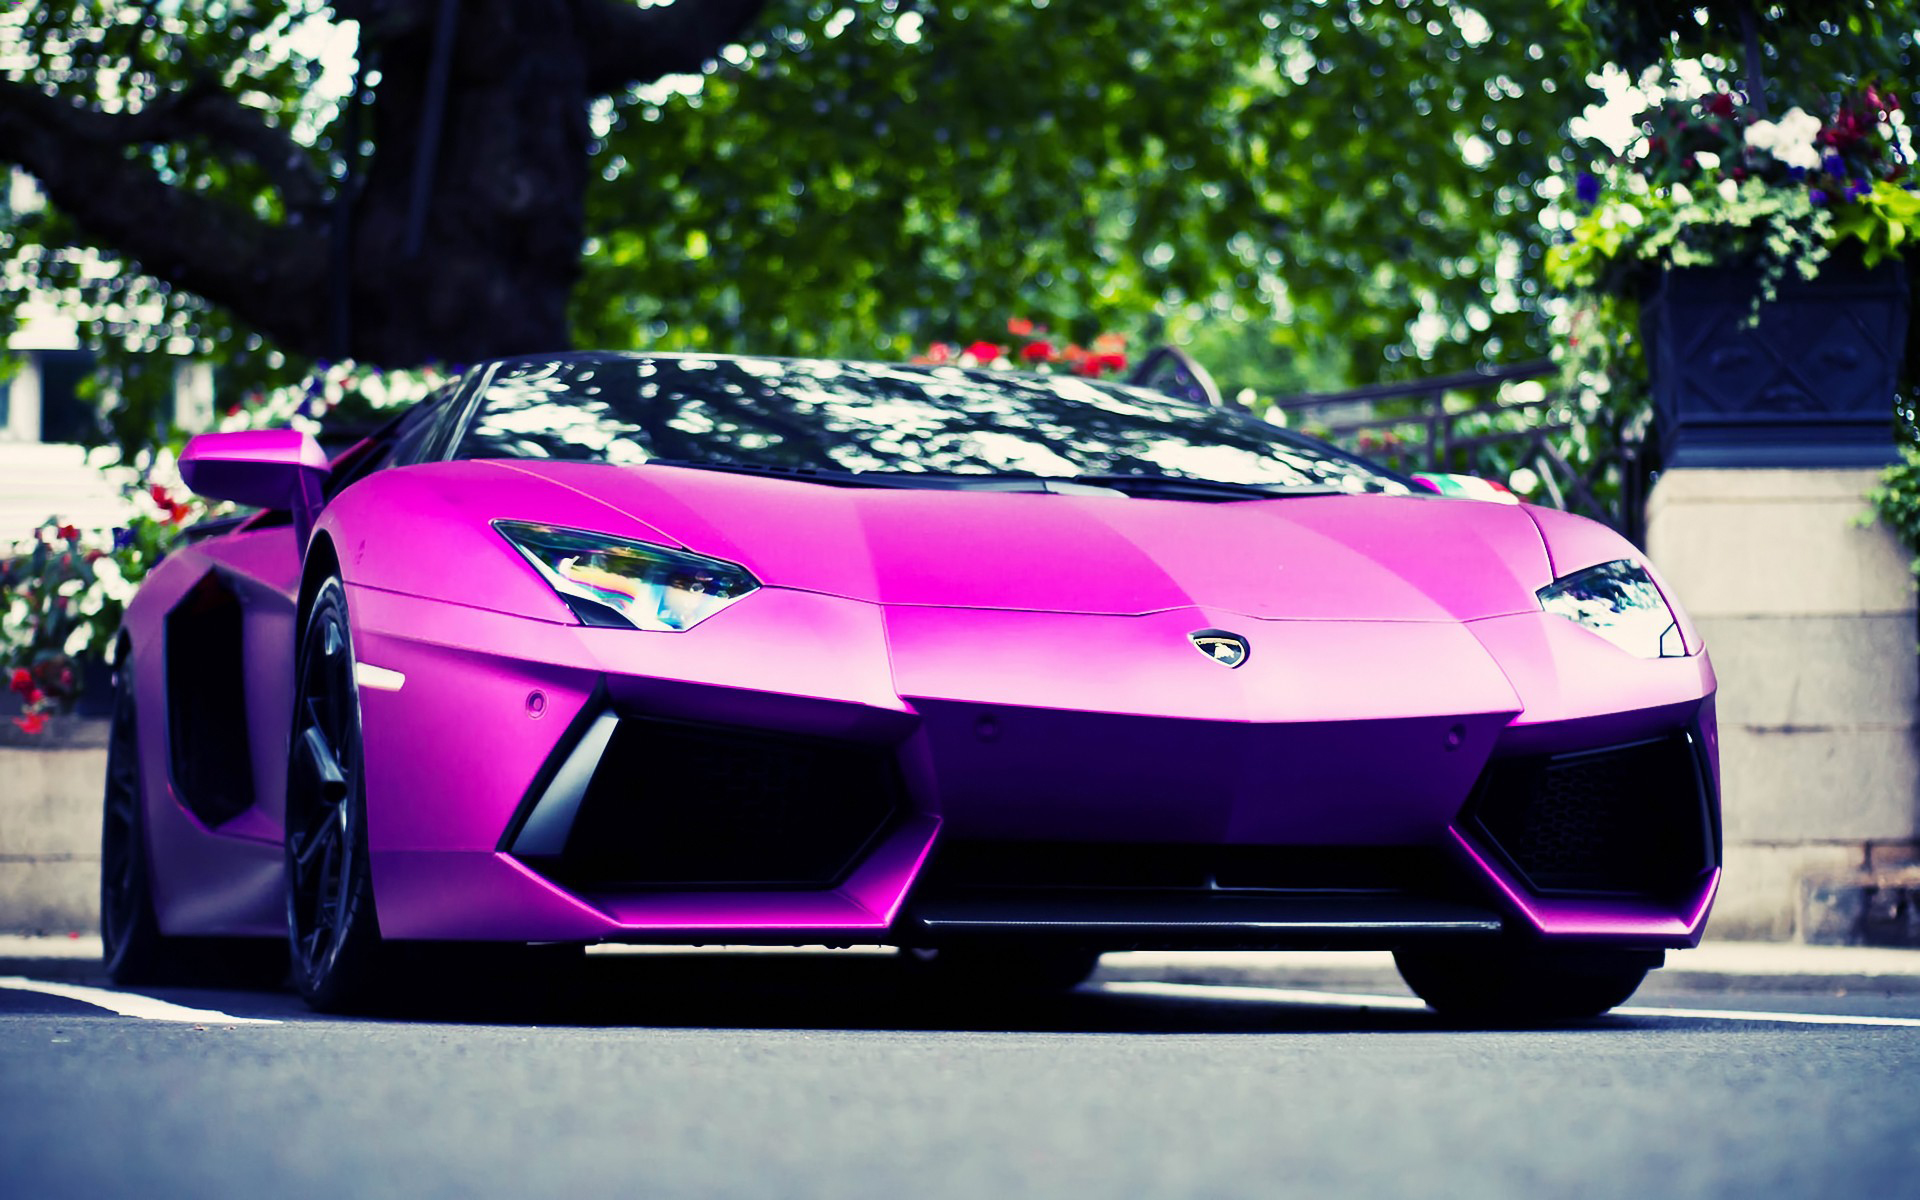 Lamborghini Aventador Wallpapers HD A50 Pink - lamborghini aventador desktop sports cars, race cars, luxury cars, expensive cars, wallpapers pictures images free download